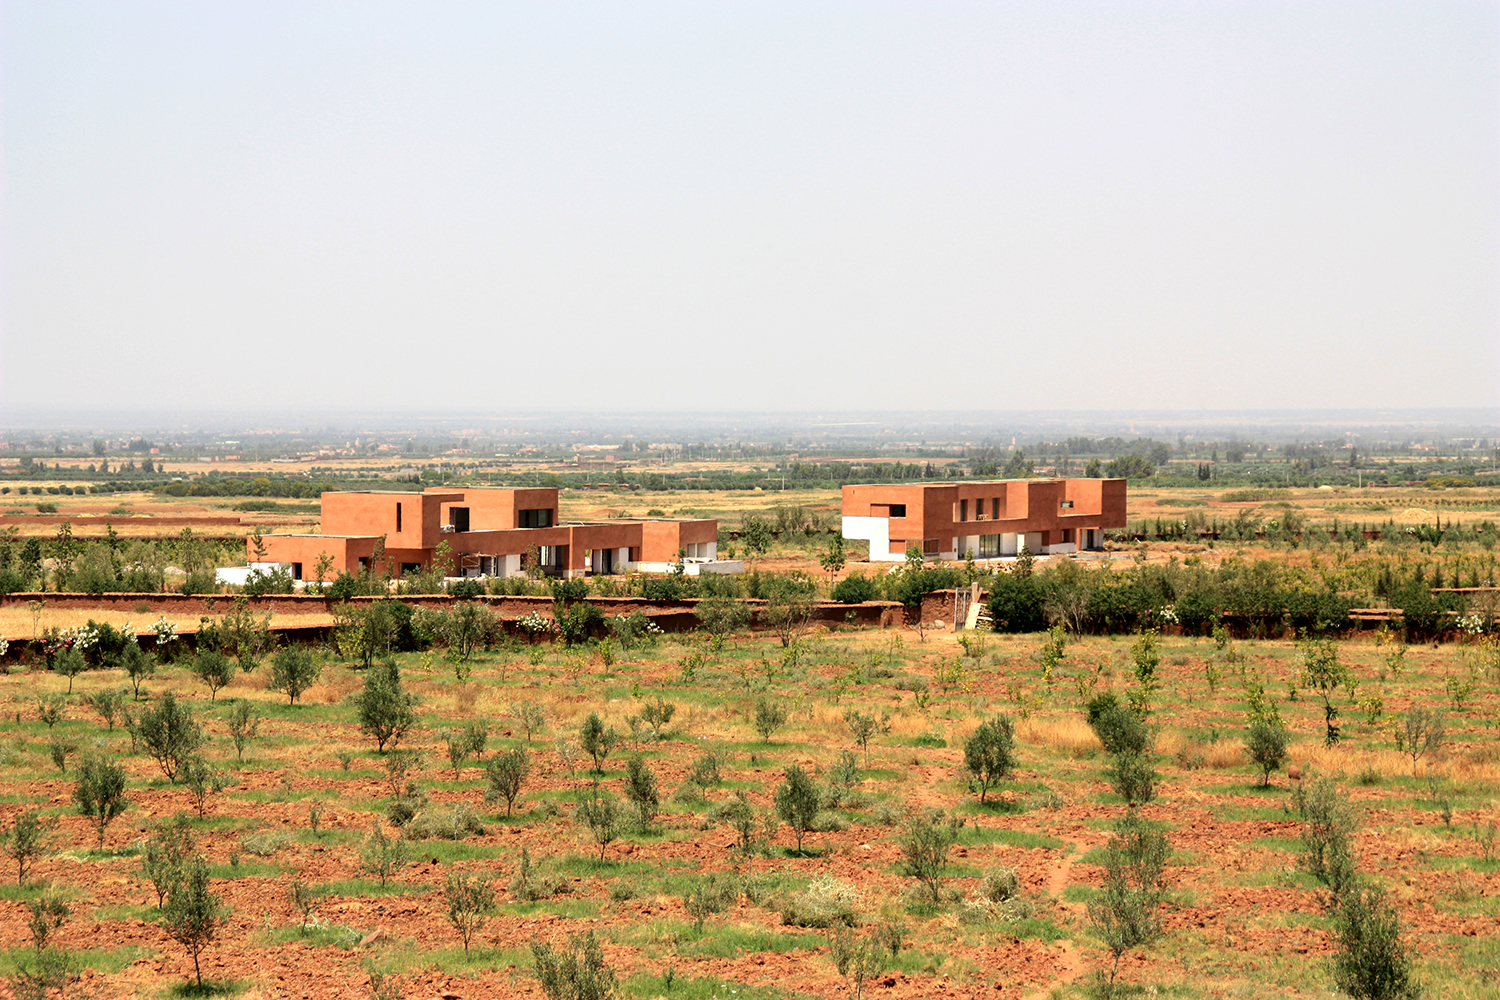 General view: the project consists of four experimental houses within a communal farm